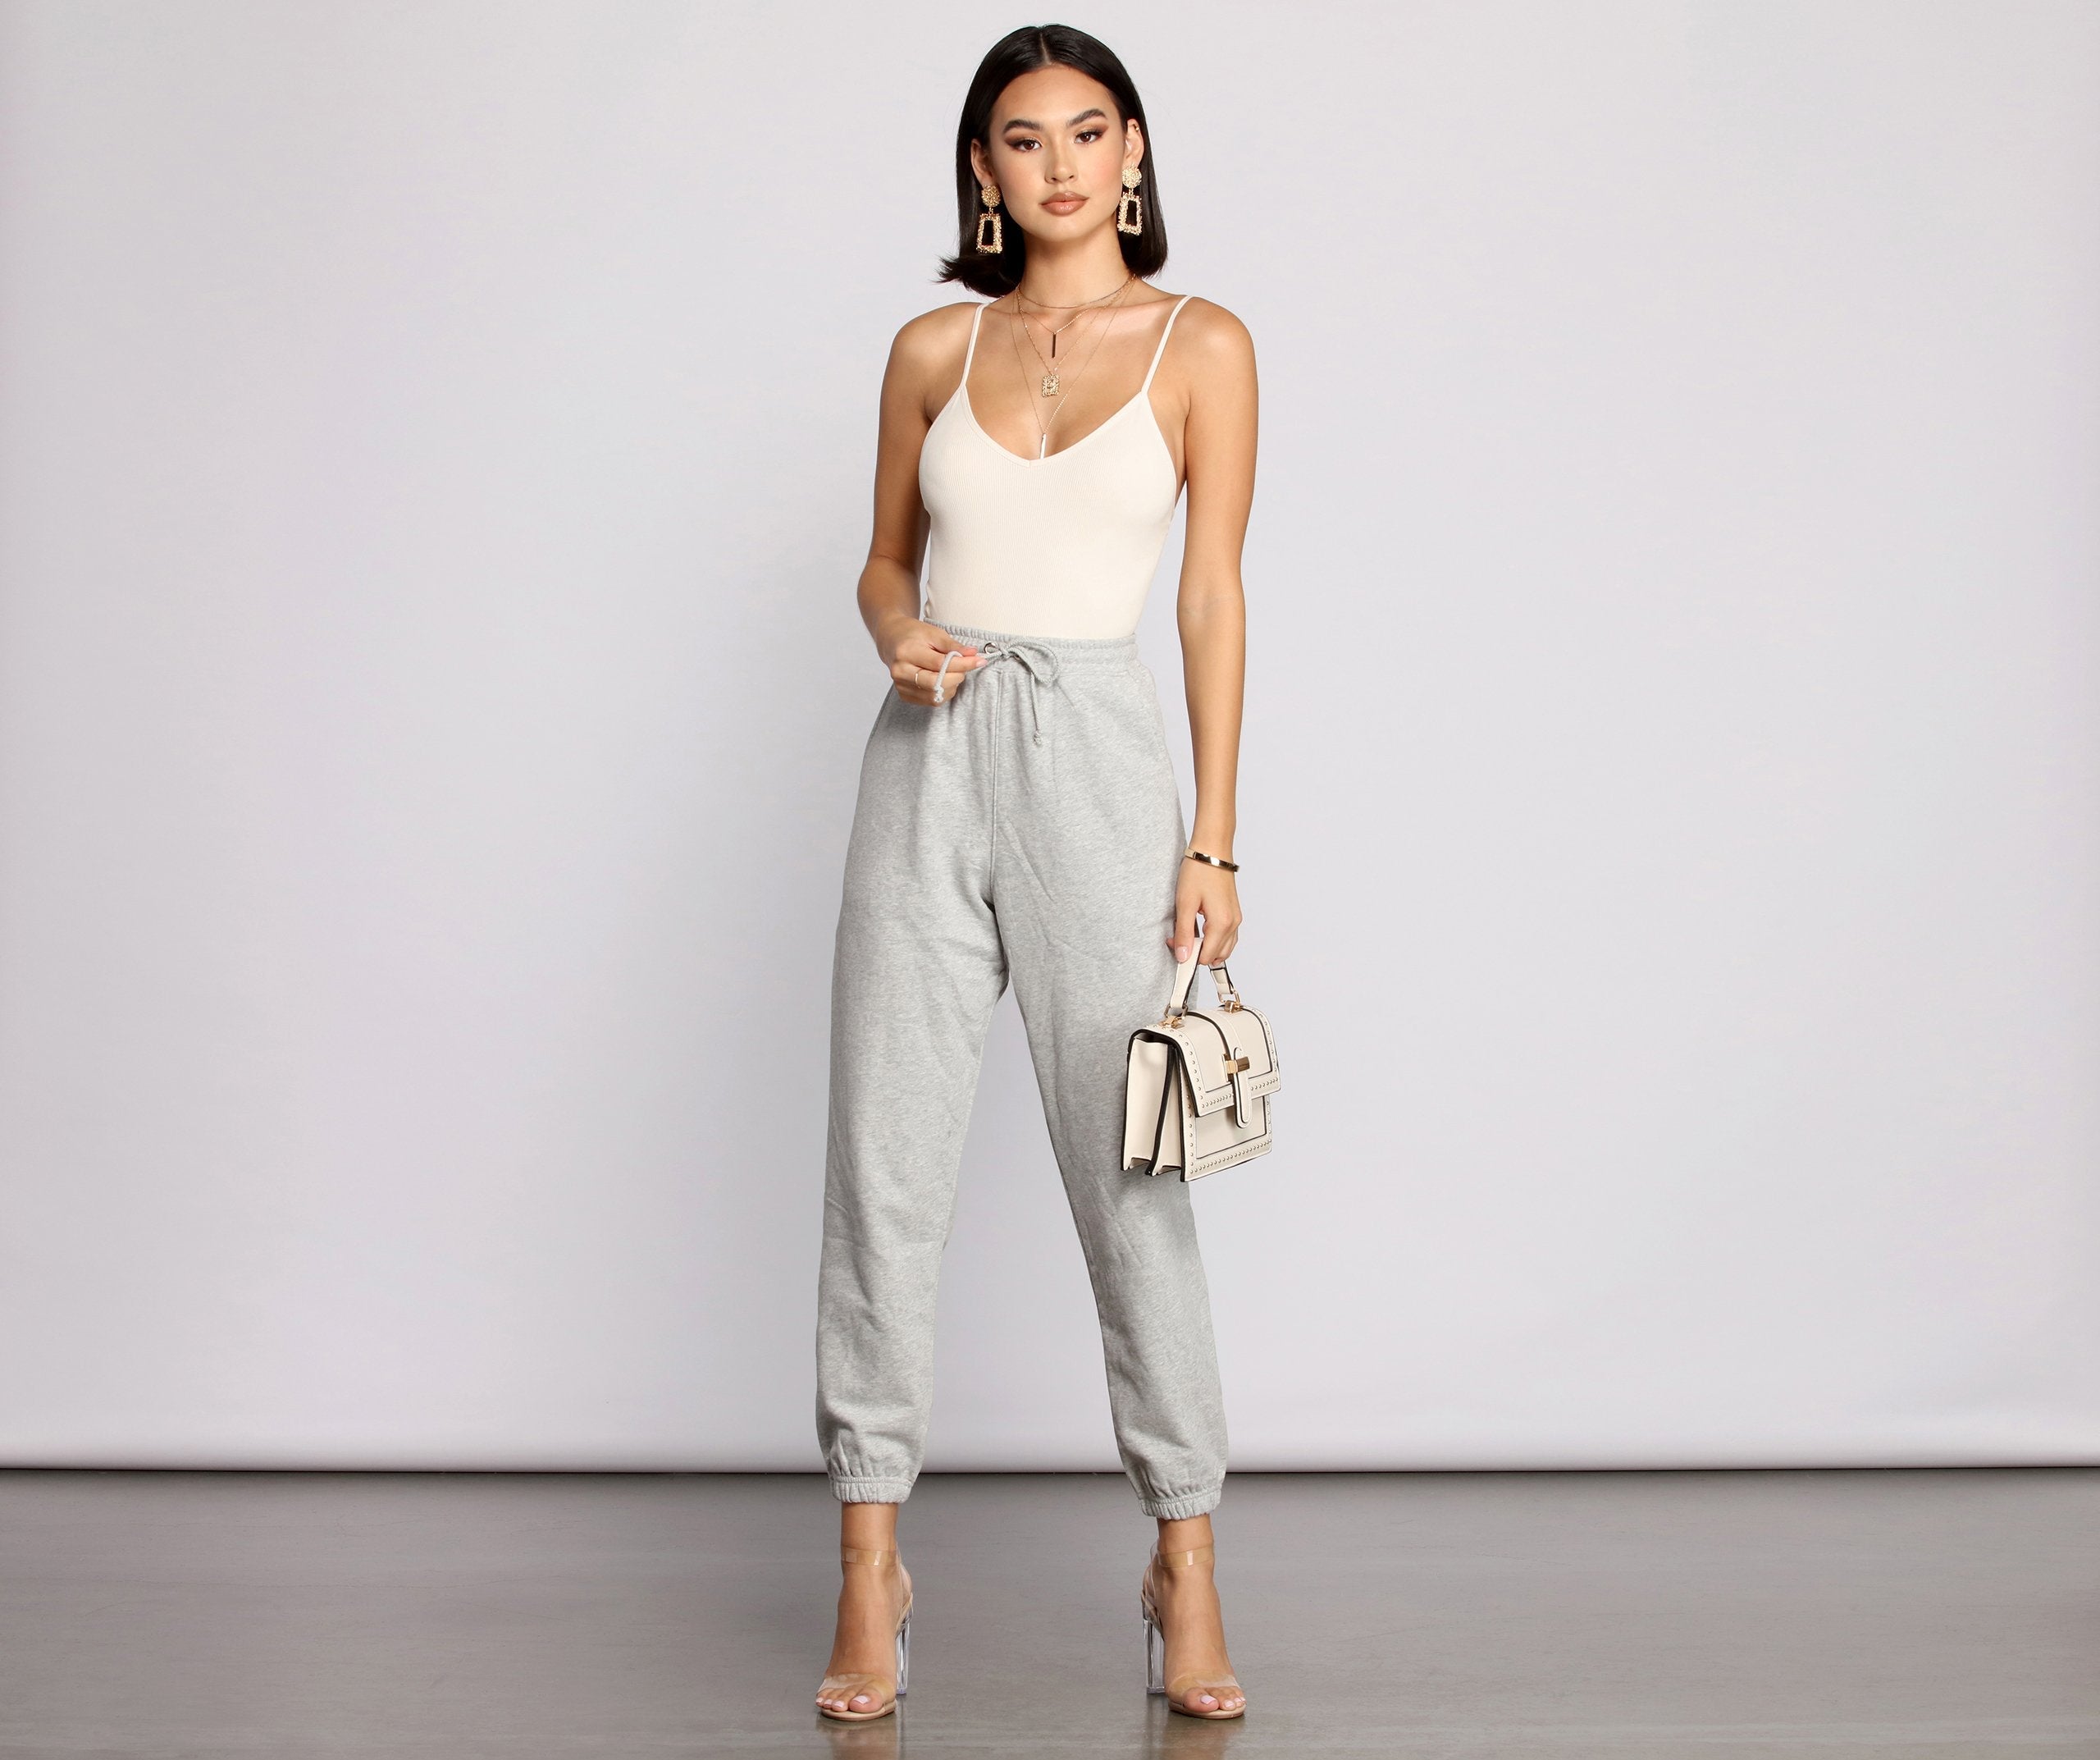 Comfy Chic French Terry Joggers